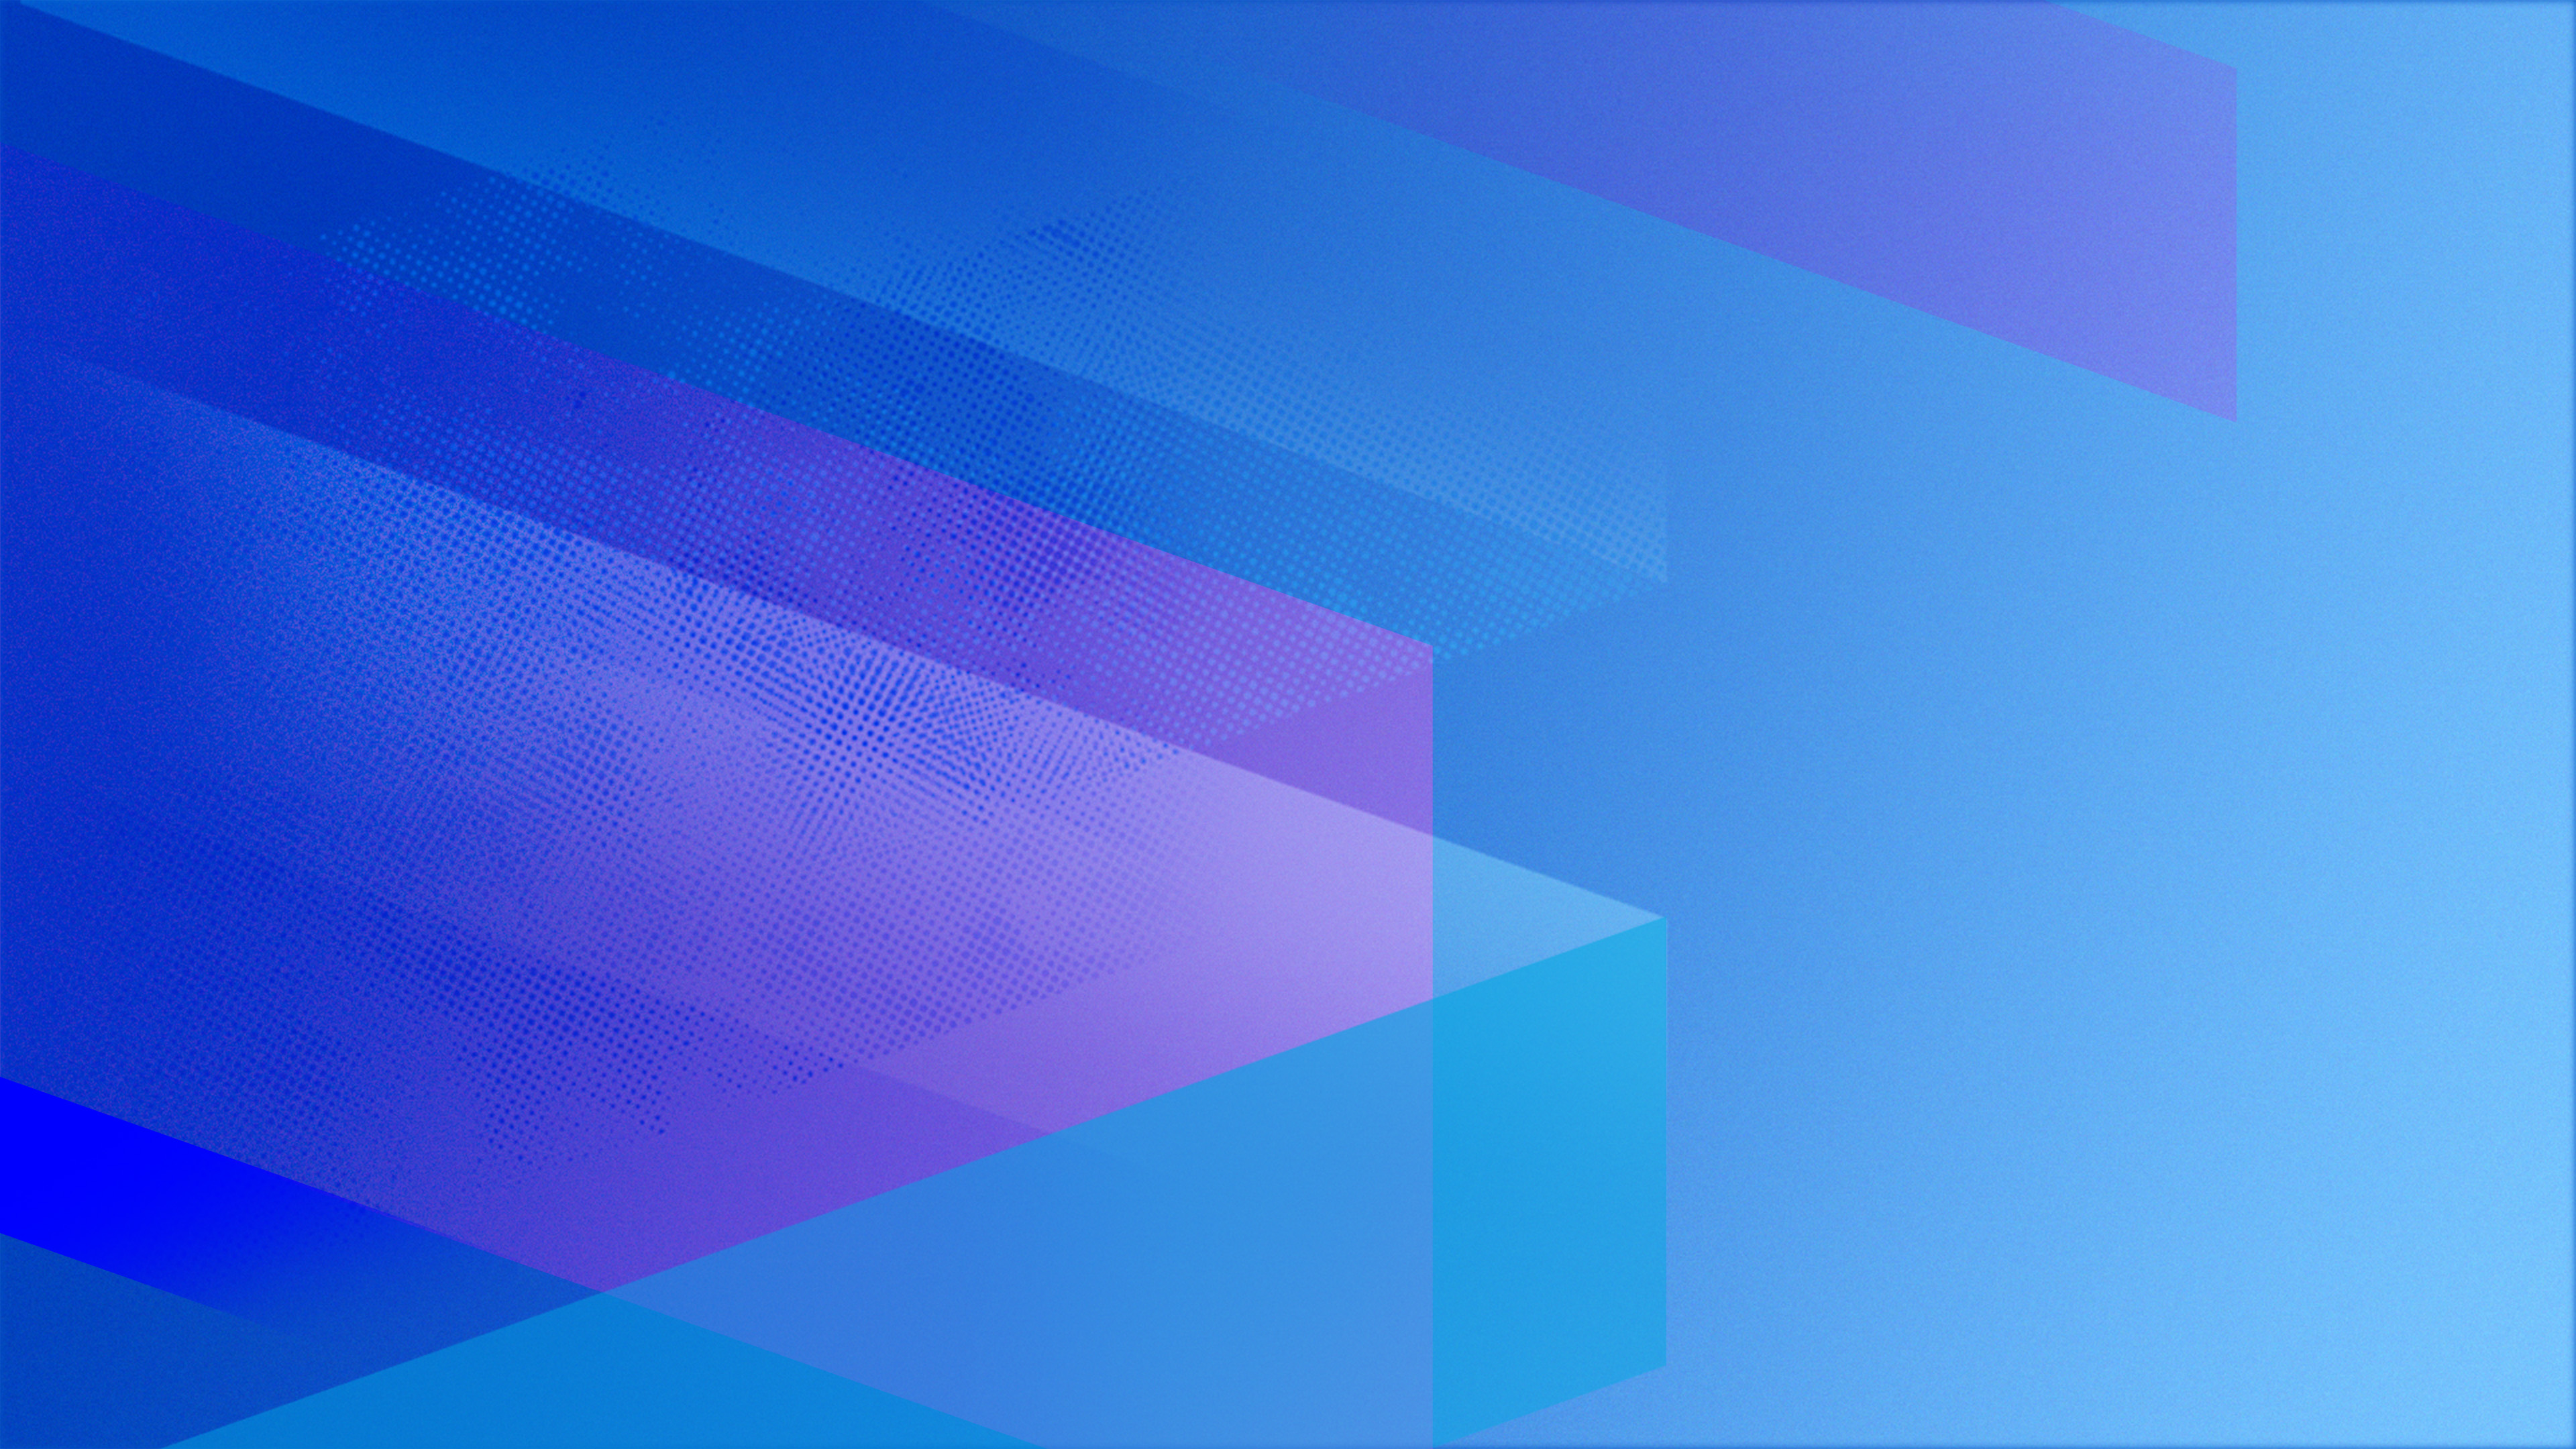 Angular geometric shapes with a striking blue and pink gradient